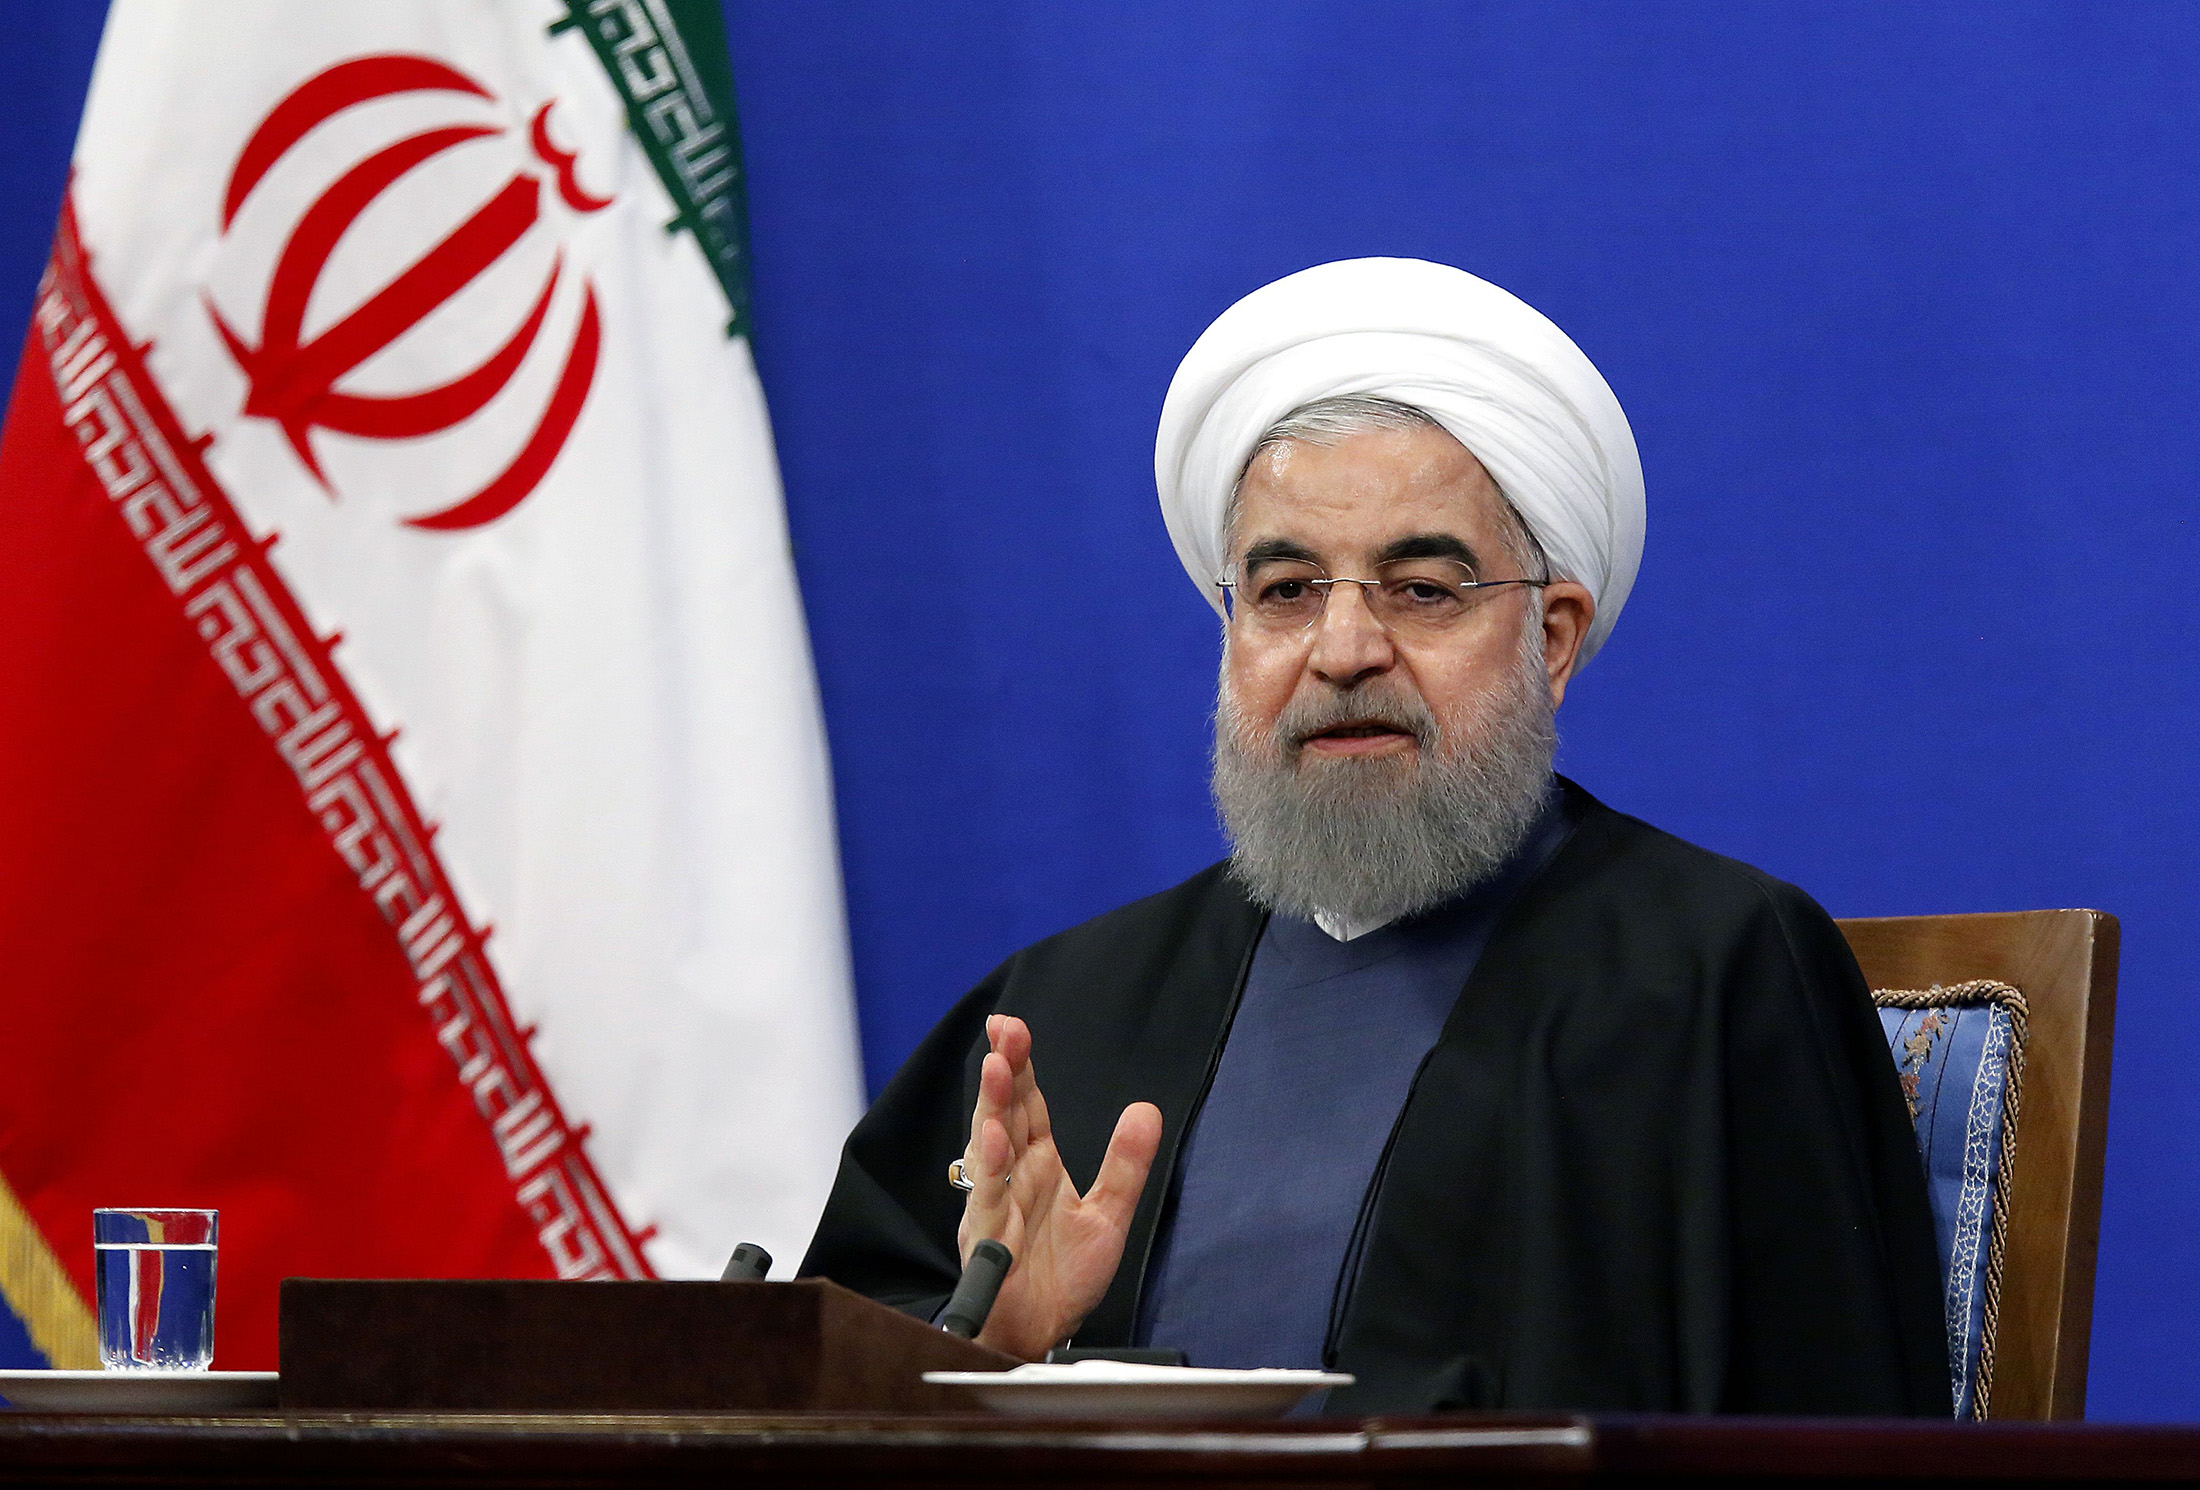 Hassan Rouhani in Tehran on April 10, 2017.
